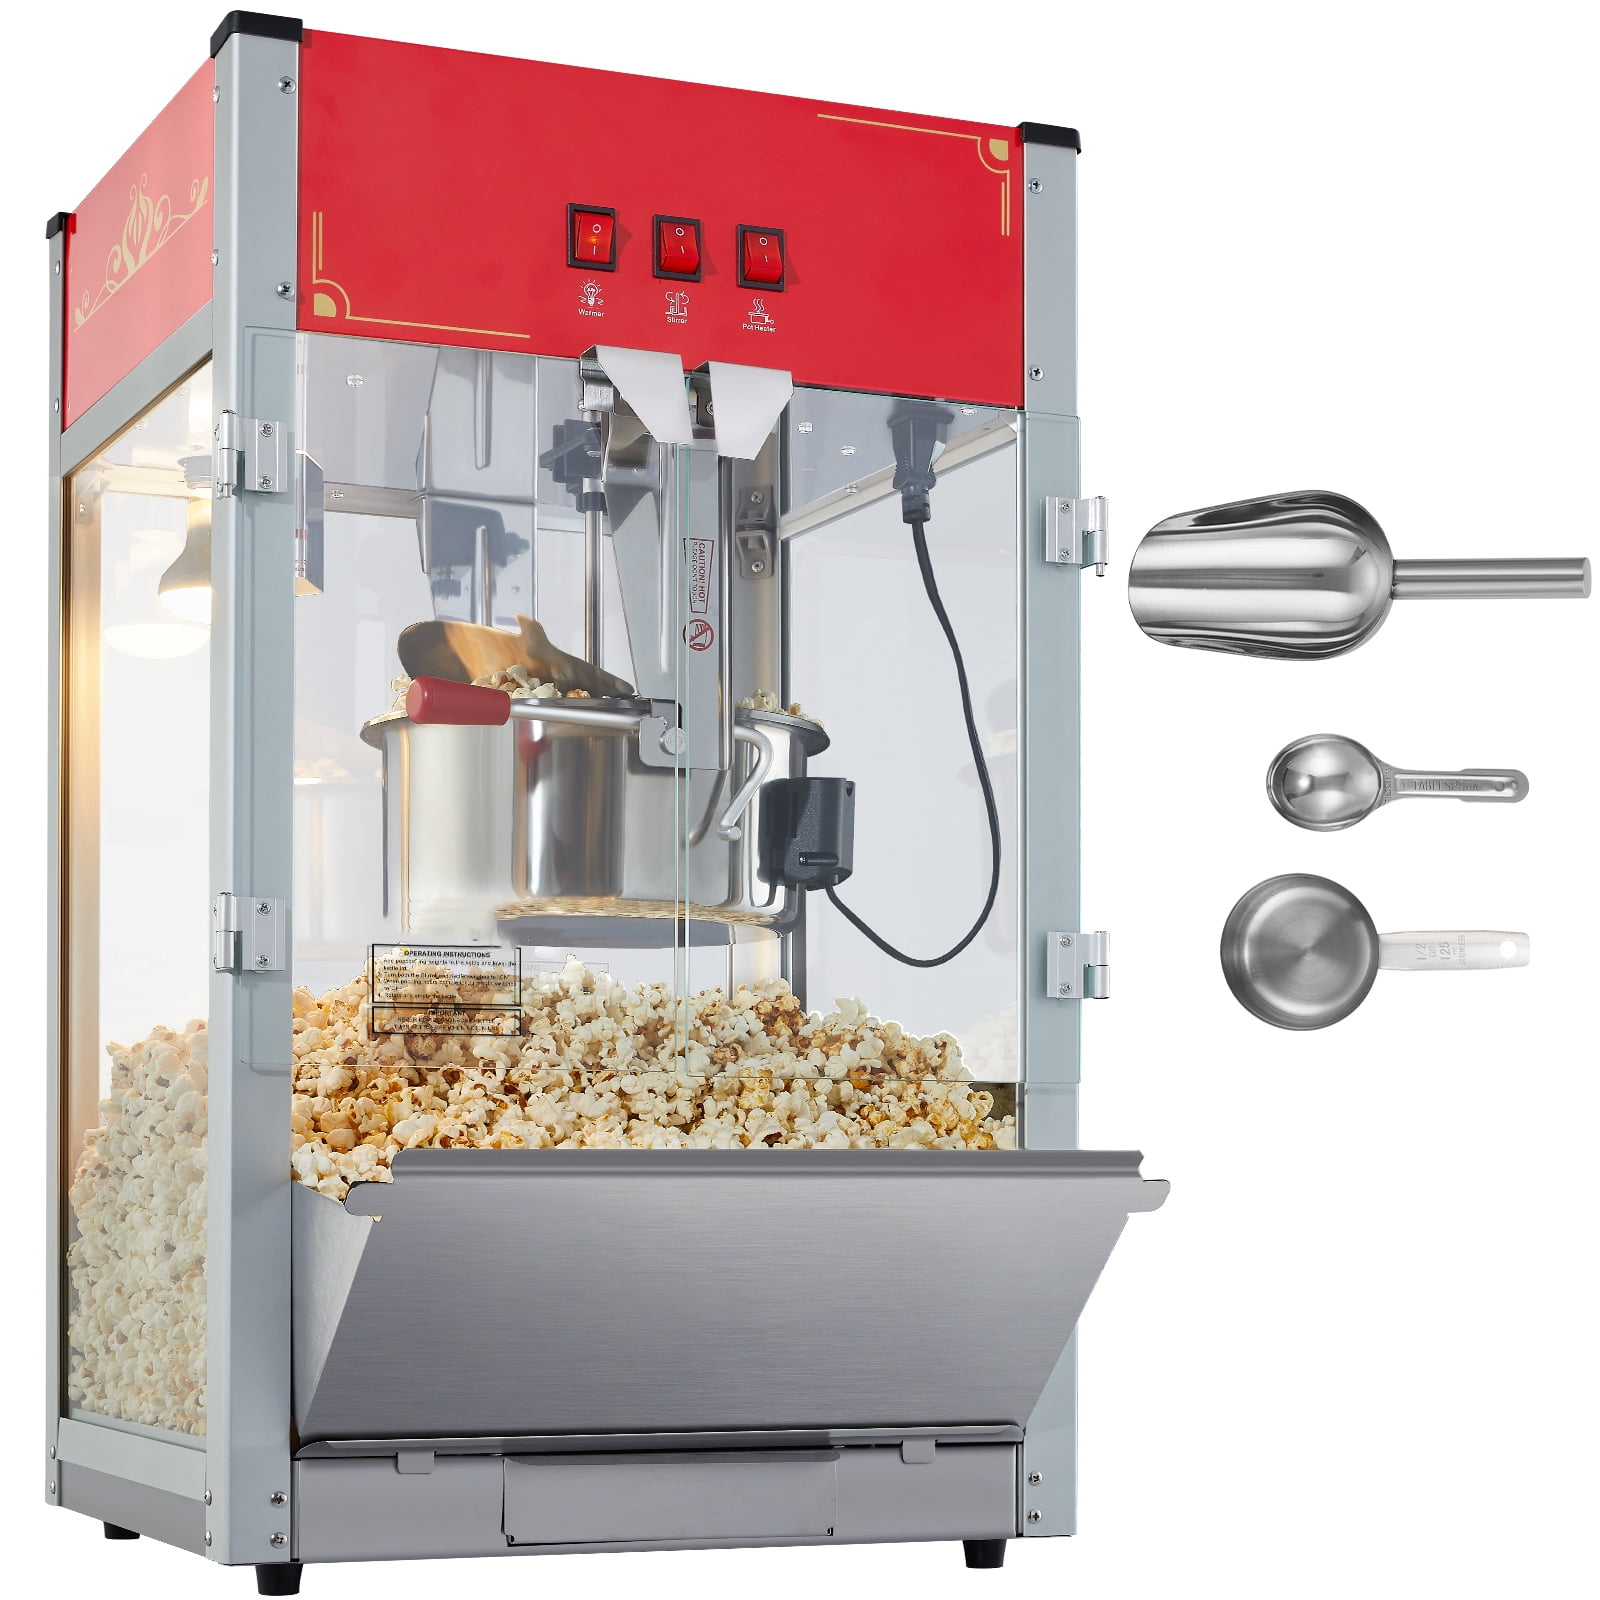 Popcorn Maker Countertop Durable with Cord Storage Kitchen - AliExpress